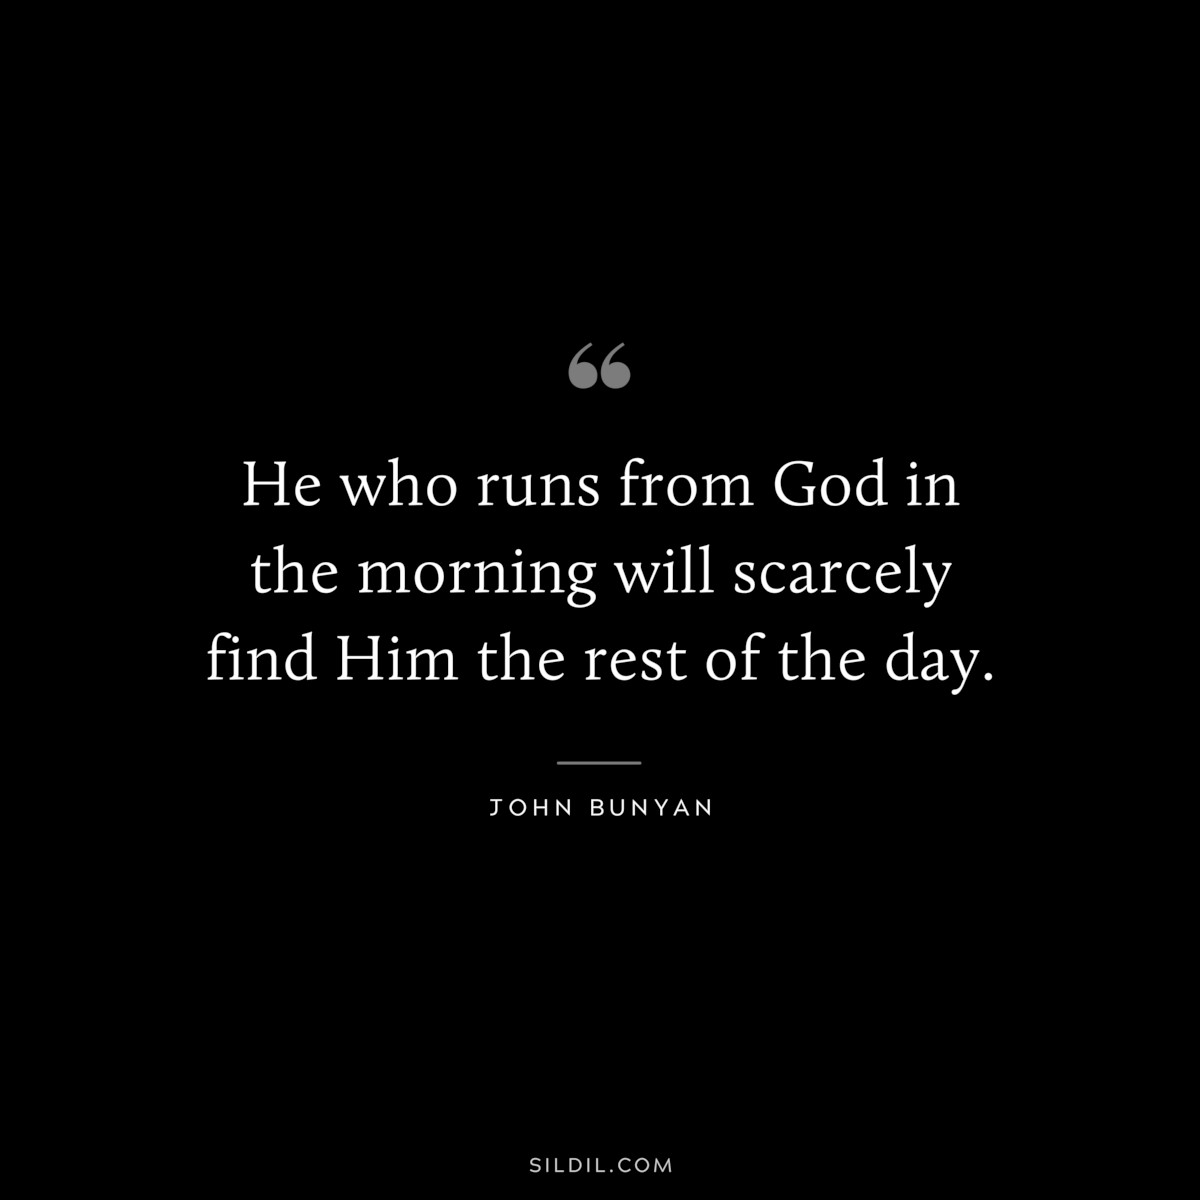 He who runs from God in the morning will scarcely find Him the rest of the day. ― John Bunyan